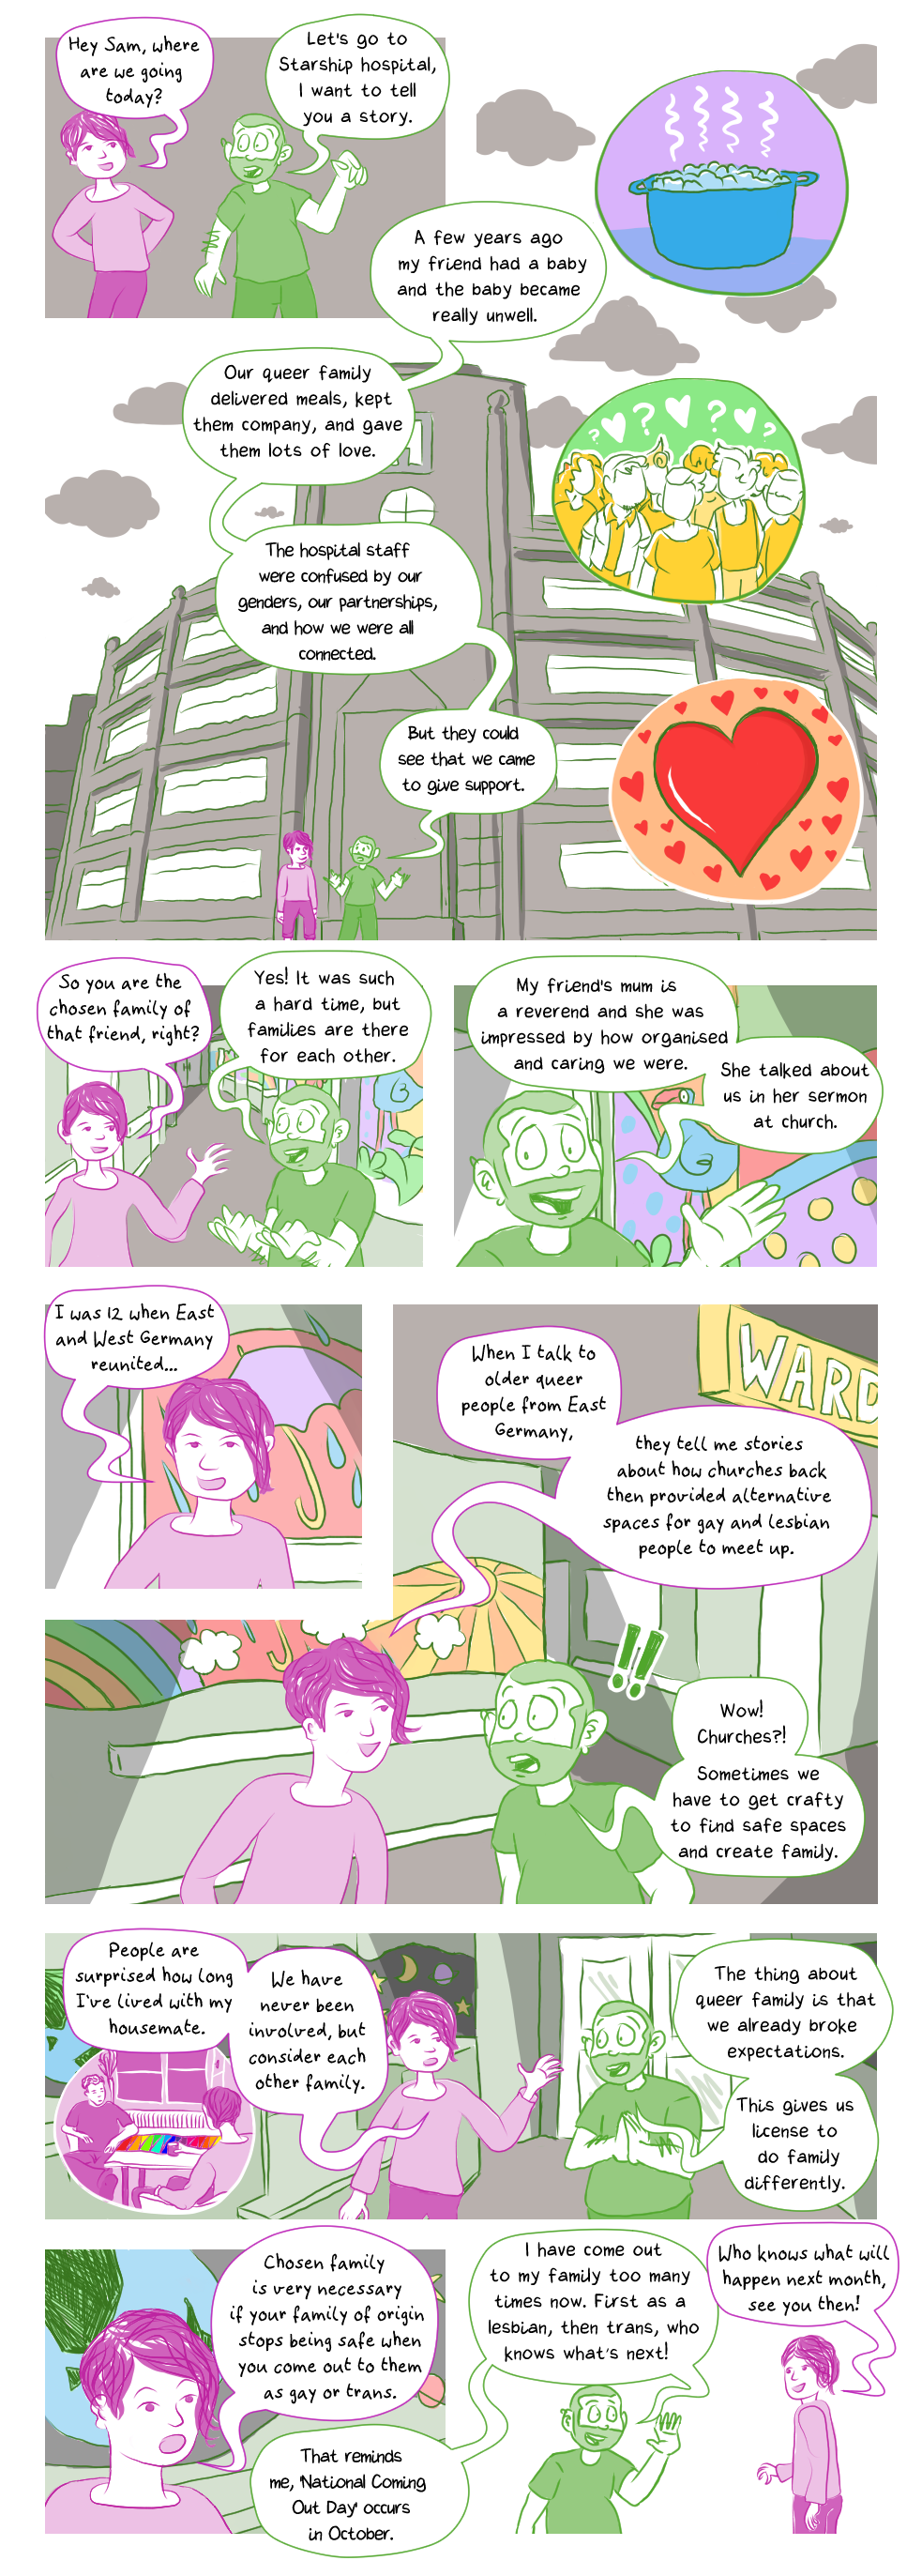 visual comic: Queer Comic Conversation: October - Chosen Family, scroll down for text-based comic (after annotations)